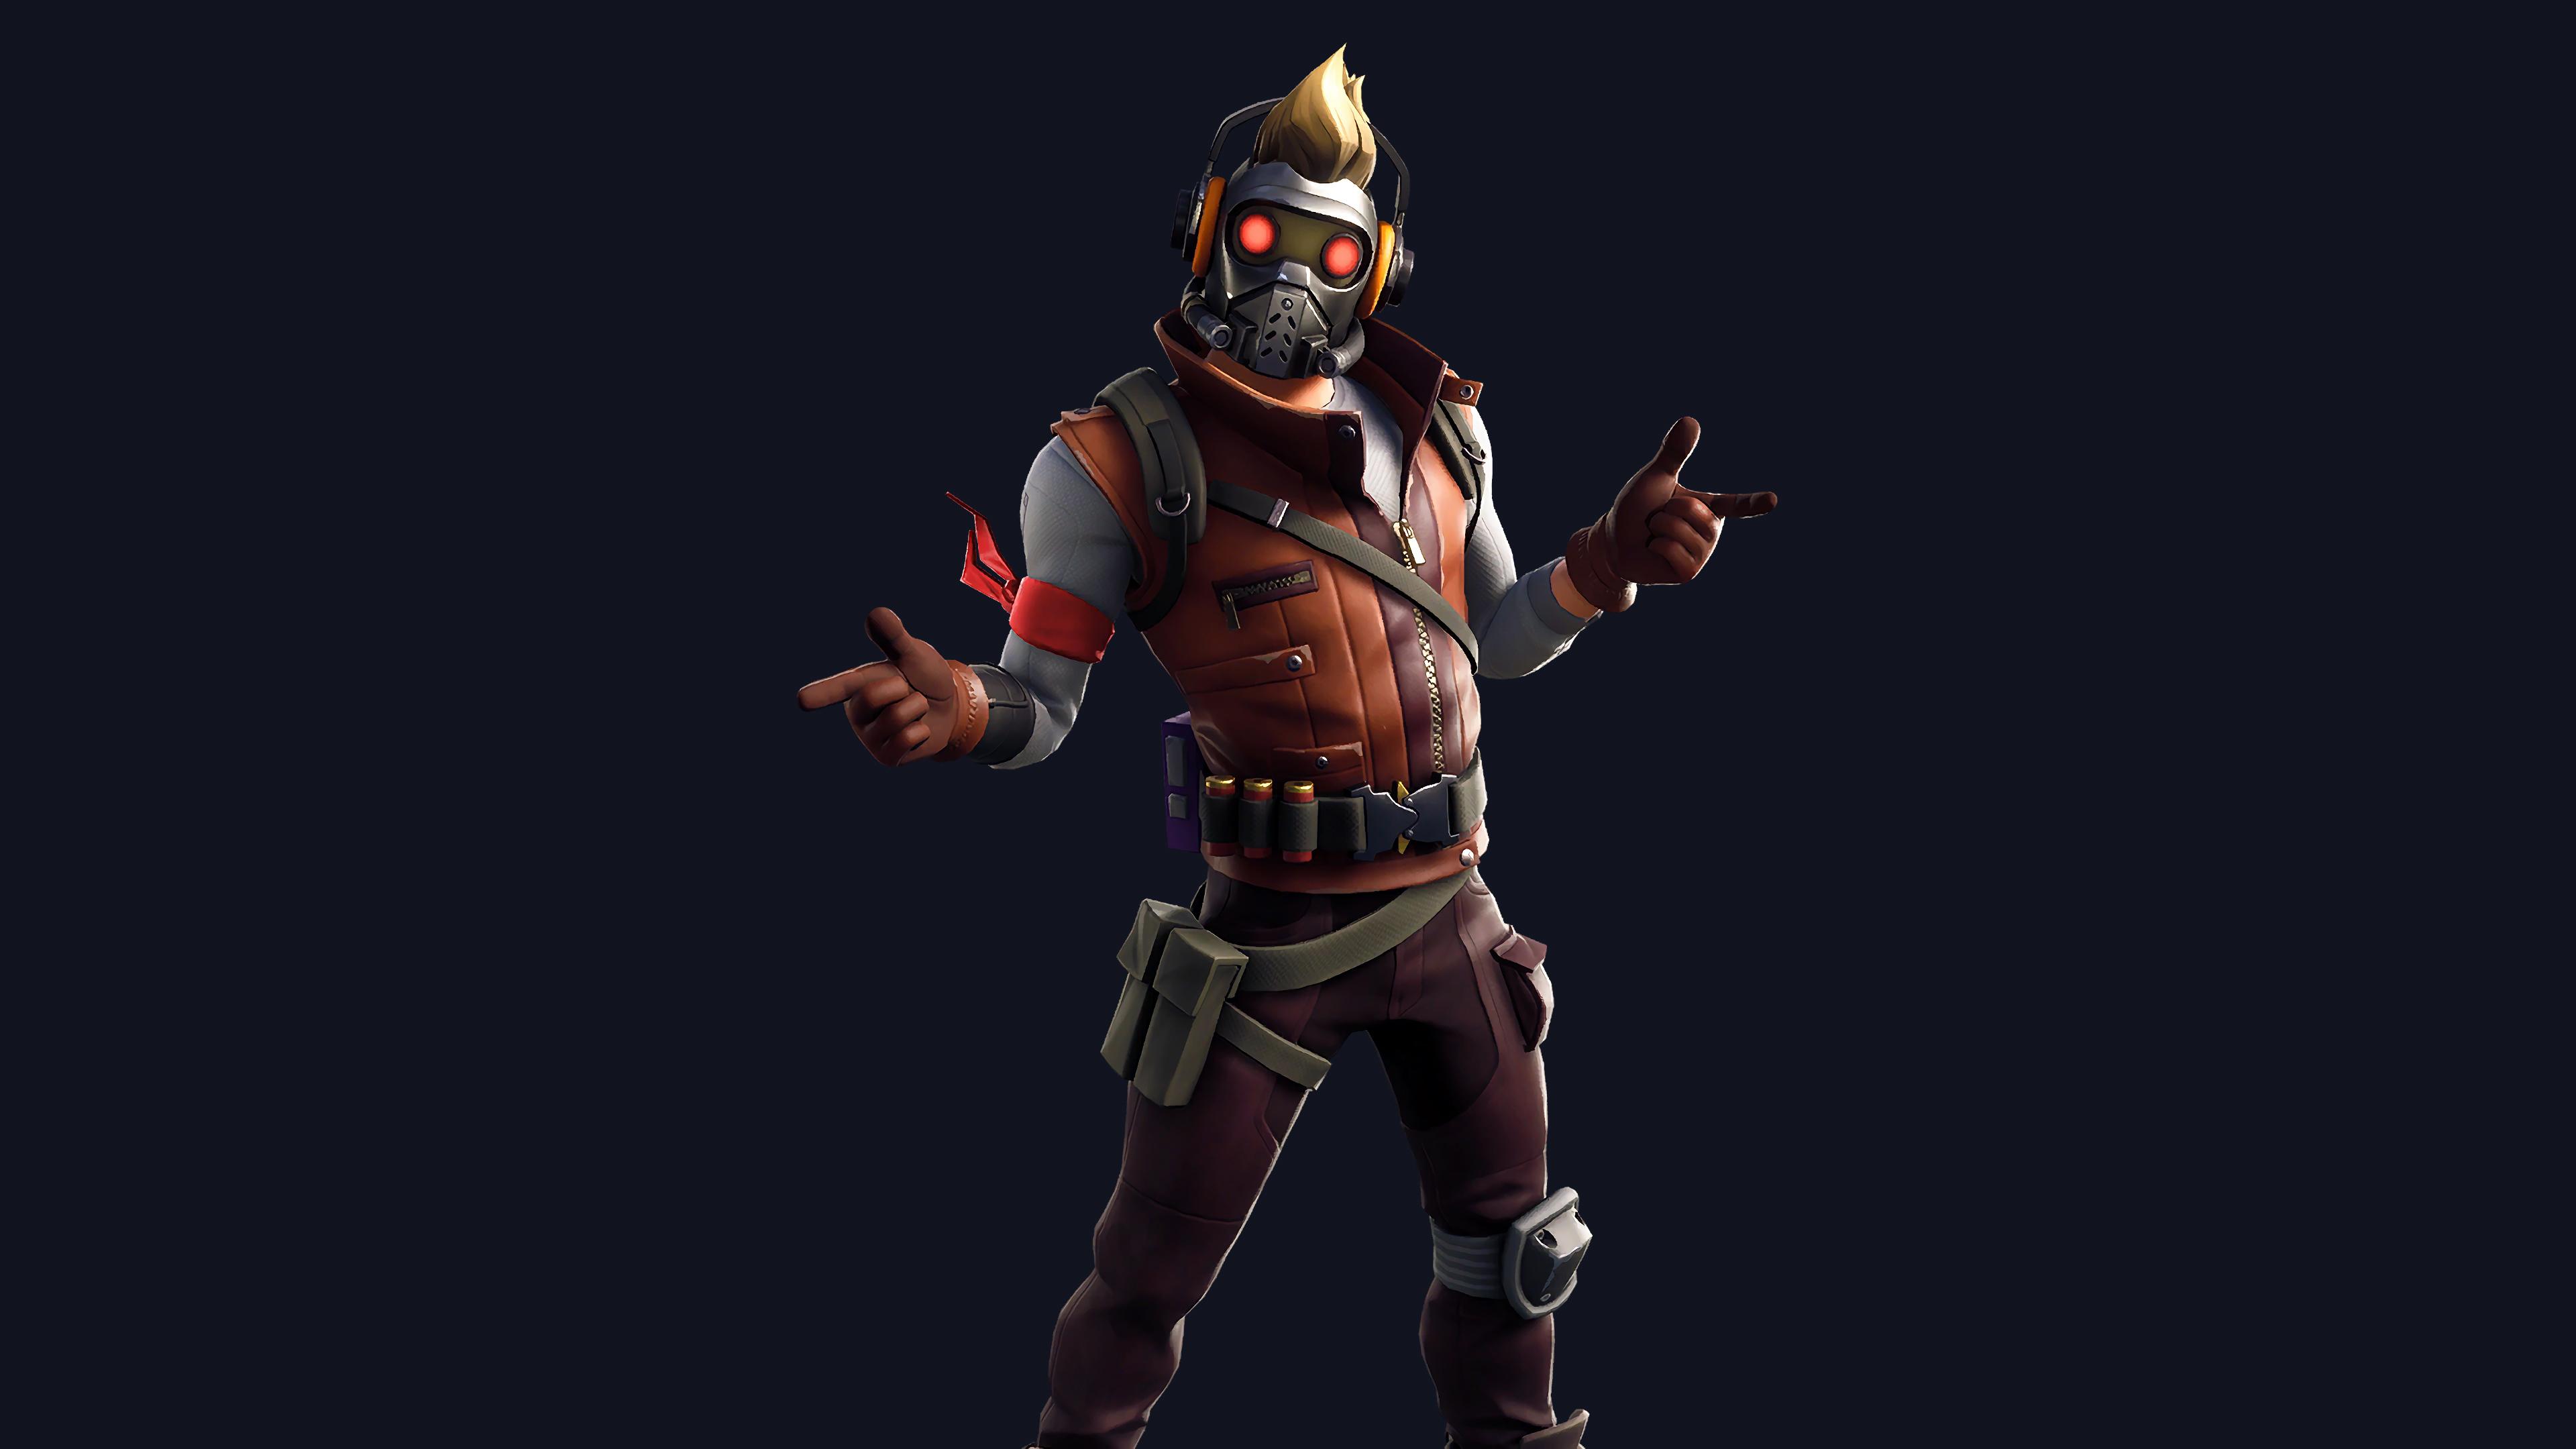 Star Lord Outfit Skin Fortnite Avengers Wallpaper, HD Games 4K